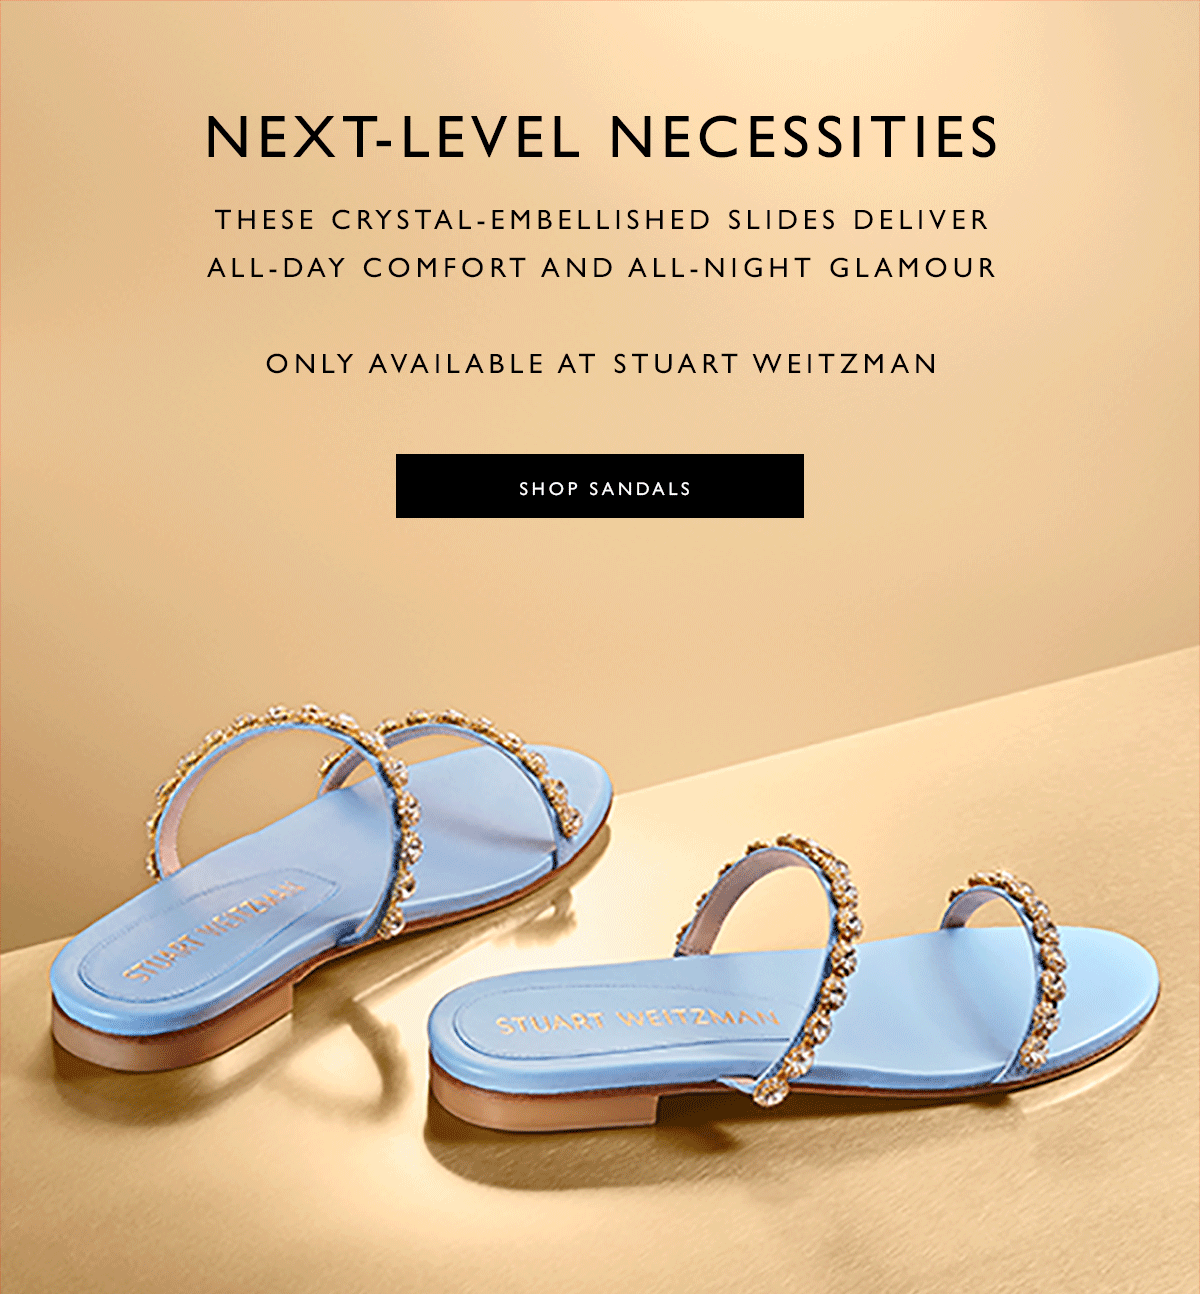 Next-Level Necessities. These crystal-embellished slides deliver all-day comfort and all-night glamour . ONLY AVAILABLE AT STUART WEITZMAN. SHOP SANDALS